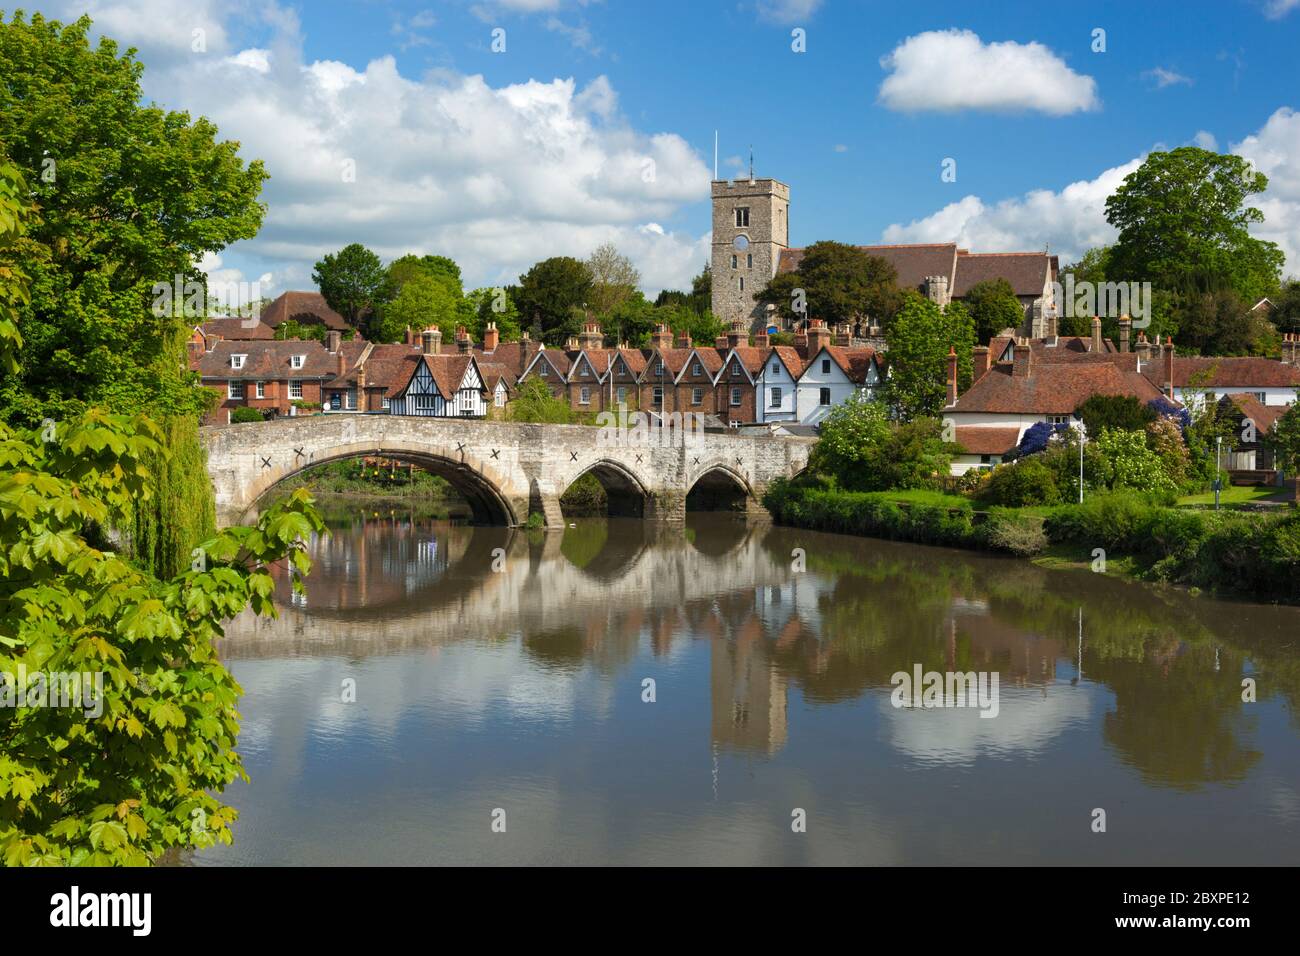 Village and medieval bridge over the River Medway, Aylesford, Kent, England, United Kingdom, Europe Stock Photo